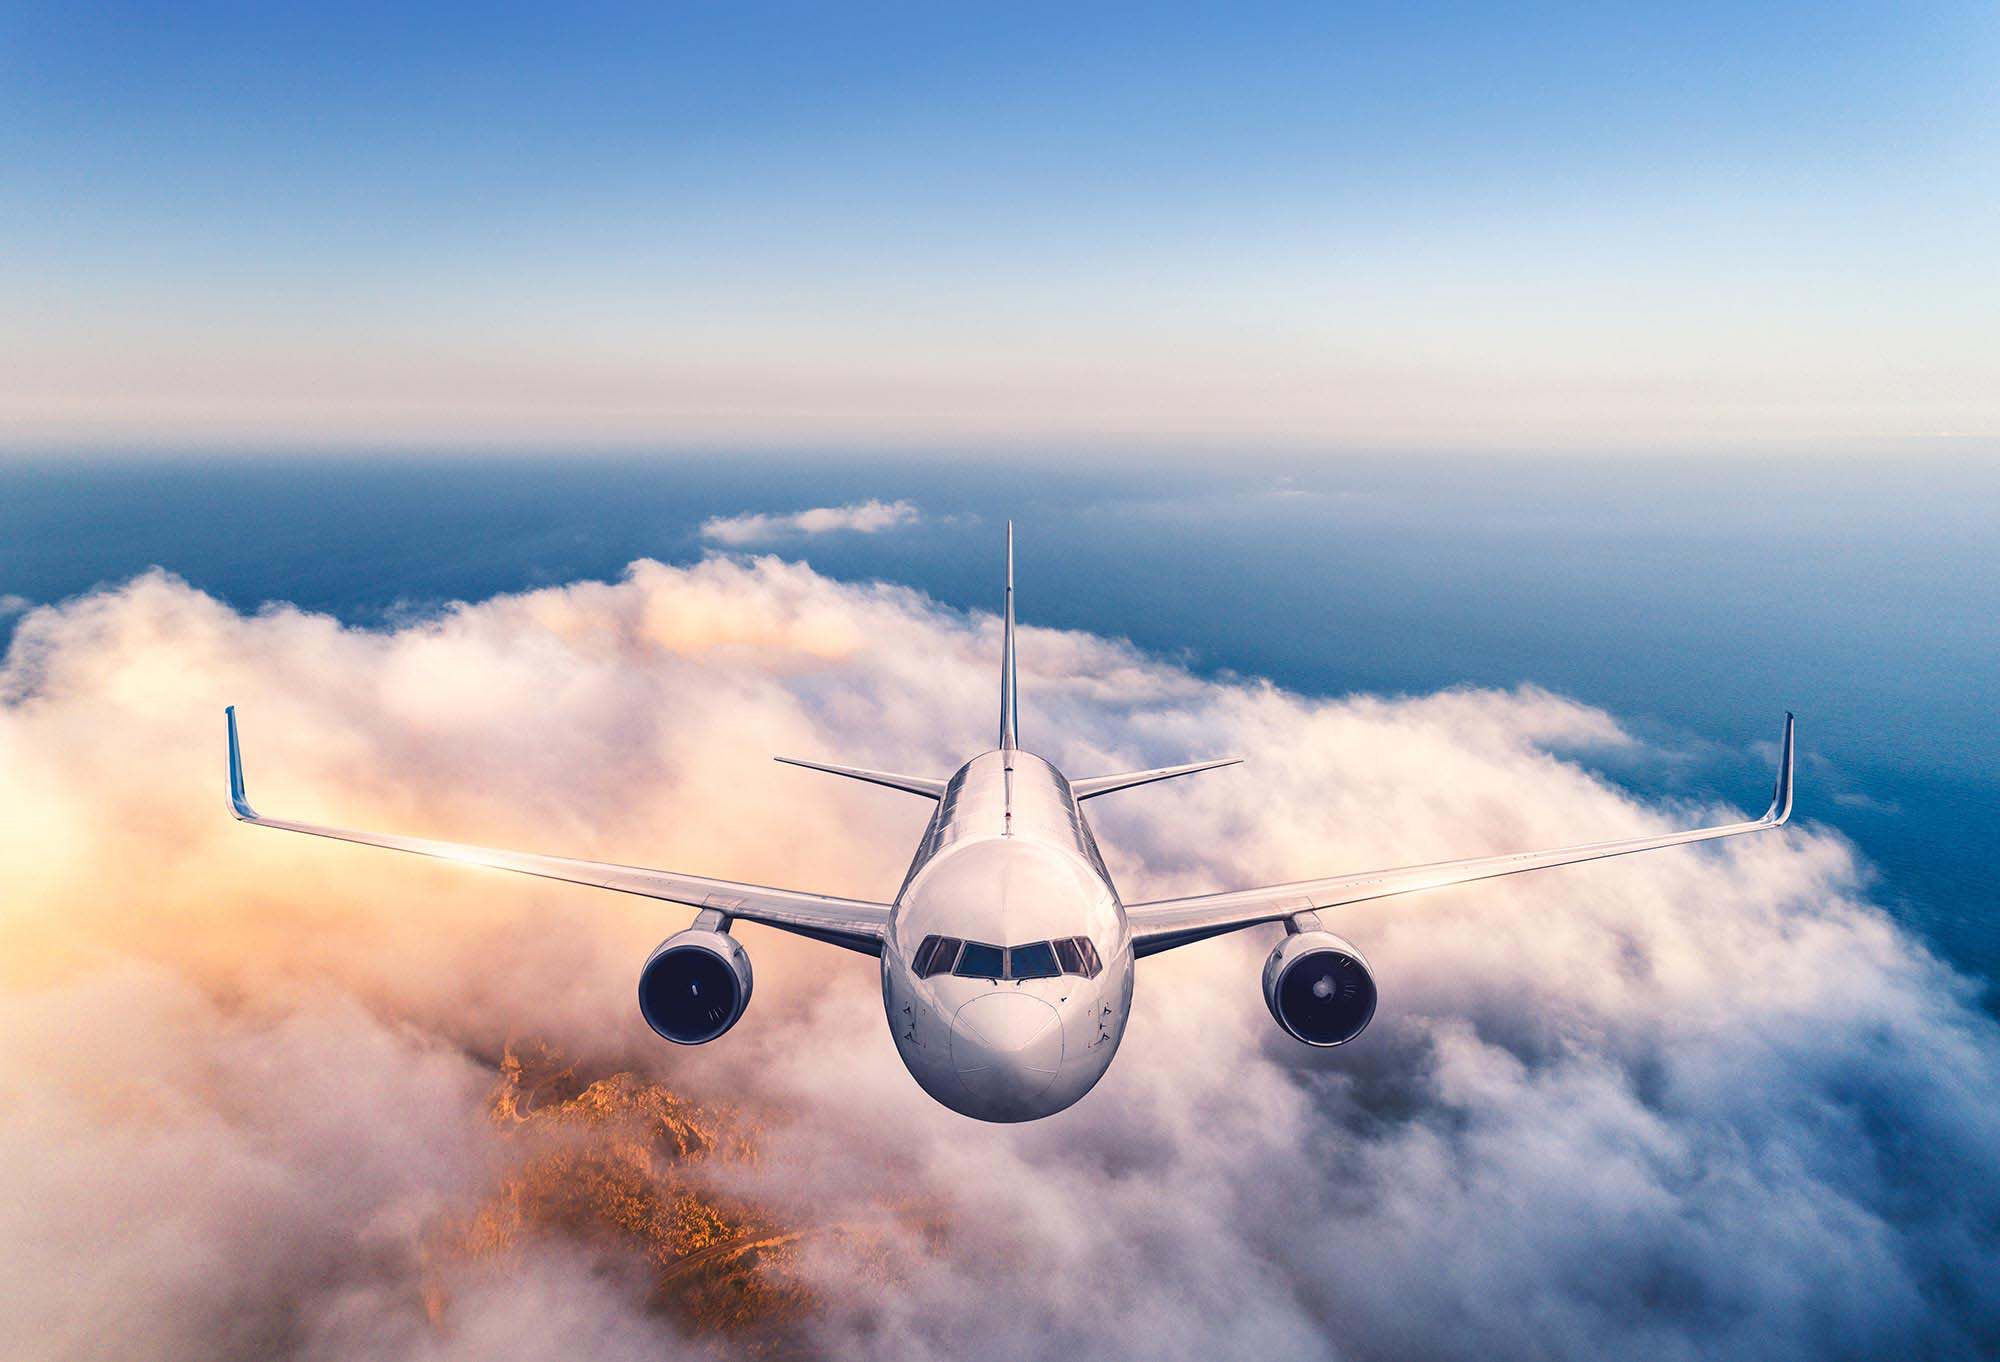 VIP Concierge service – a private jet flying above clouds